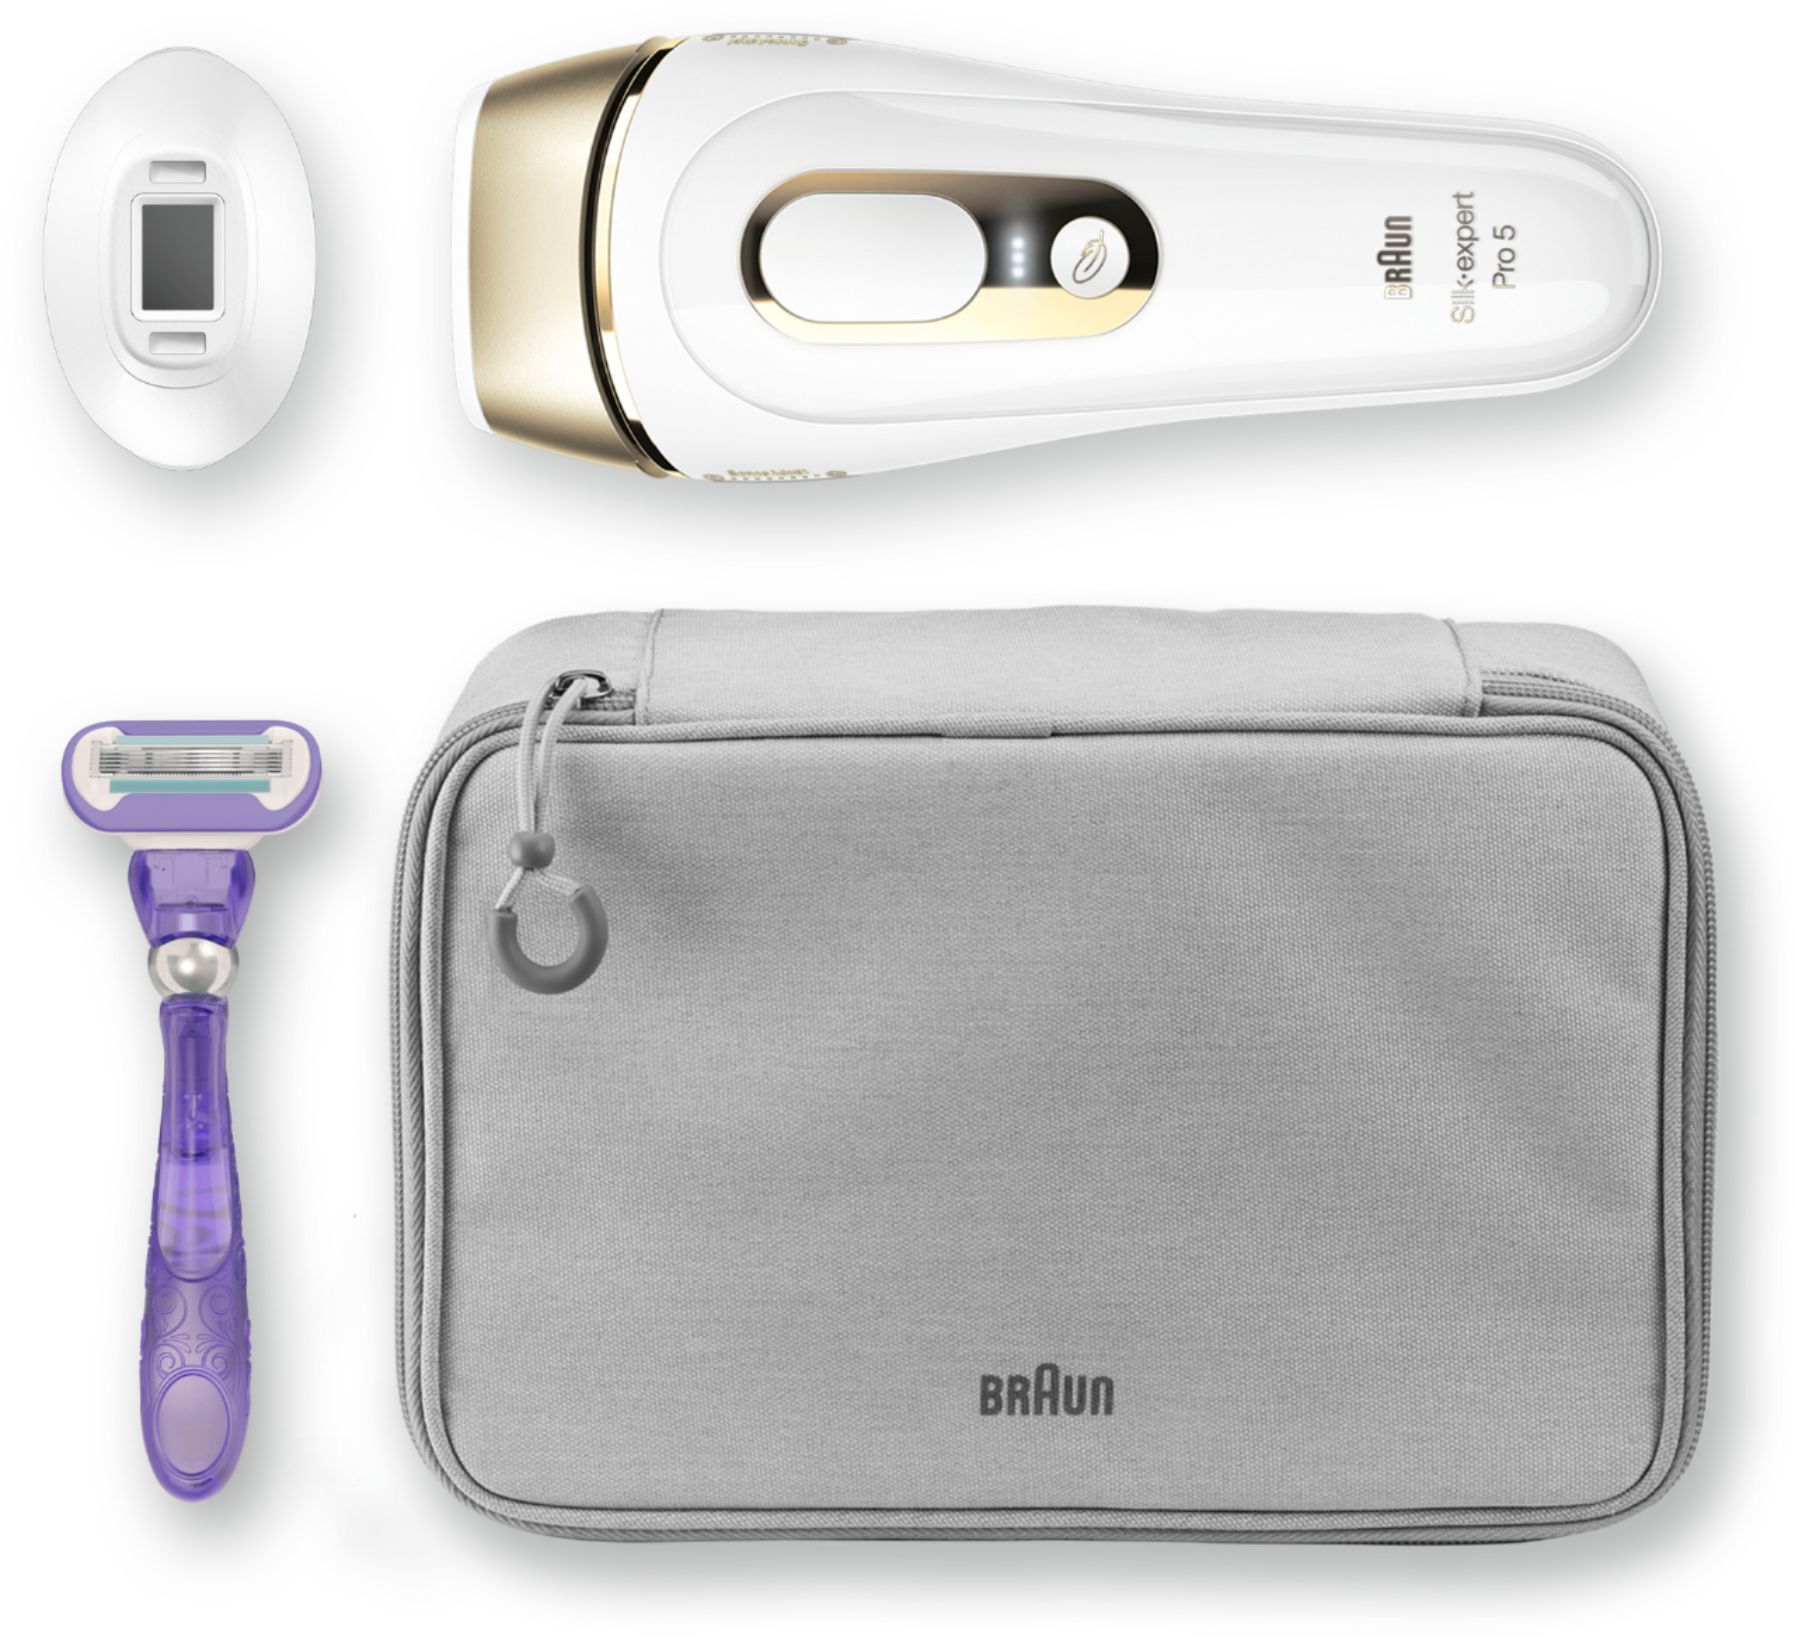 Best Buy: Braun Silk-expert Pro5 IPL Removal System (Hair Removal Device,  Pouch, Power Cord, Head, Gillette Venus Razor and Cartridge) White Braun  Female Shaver IPL 5117